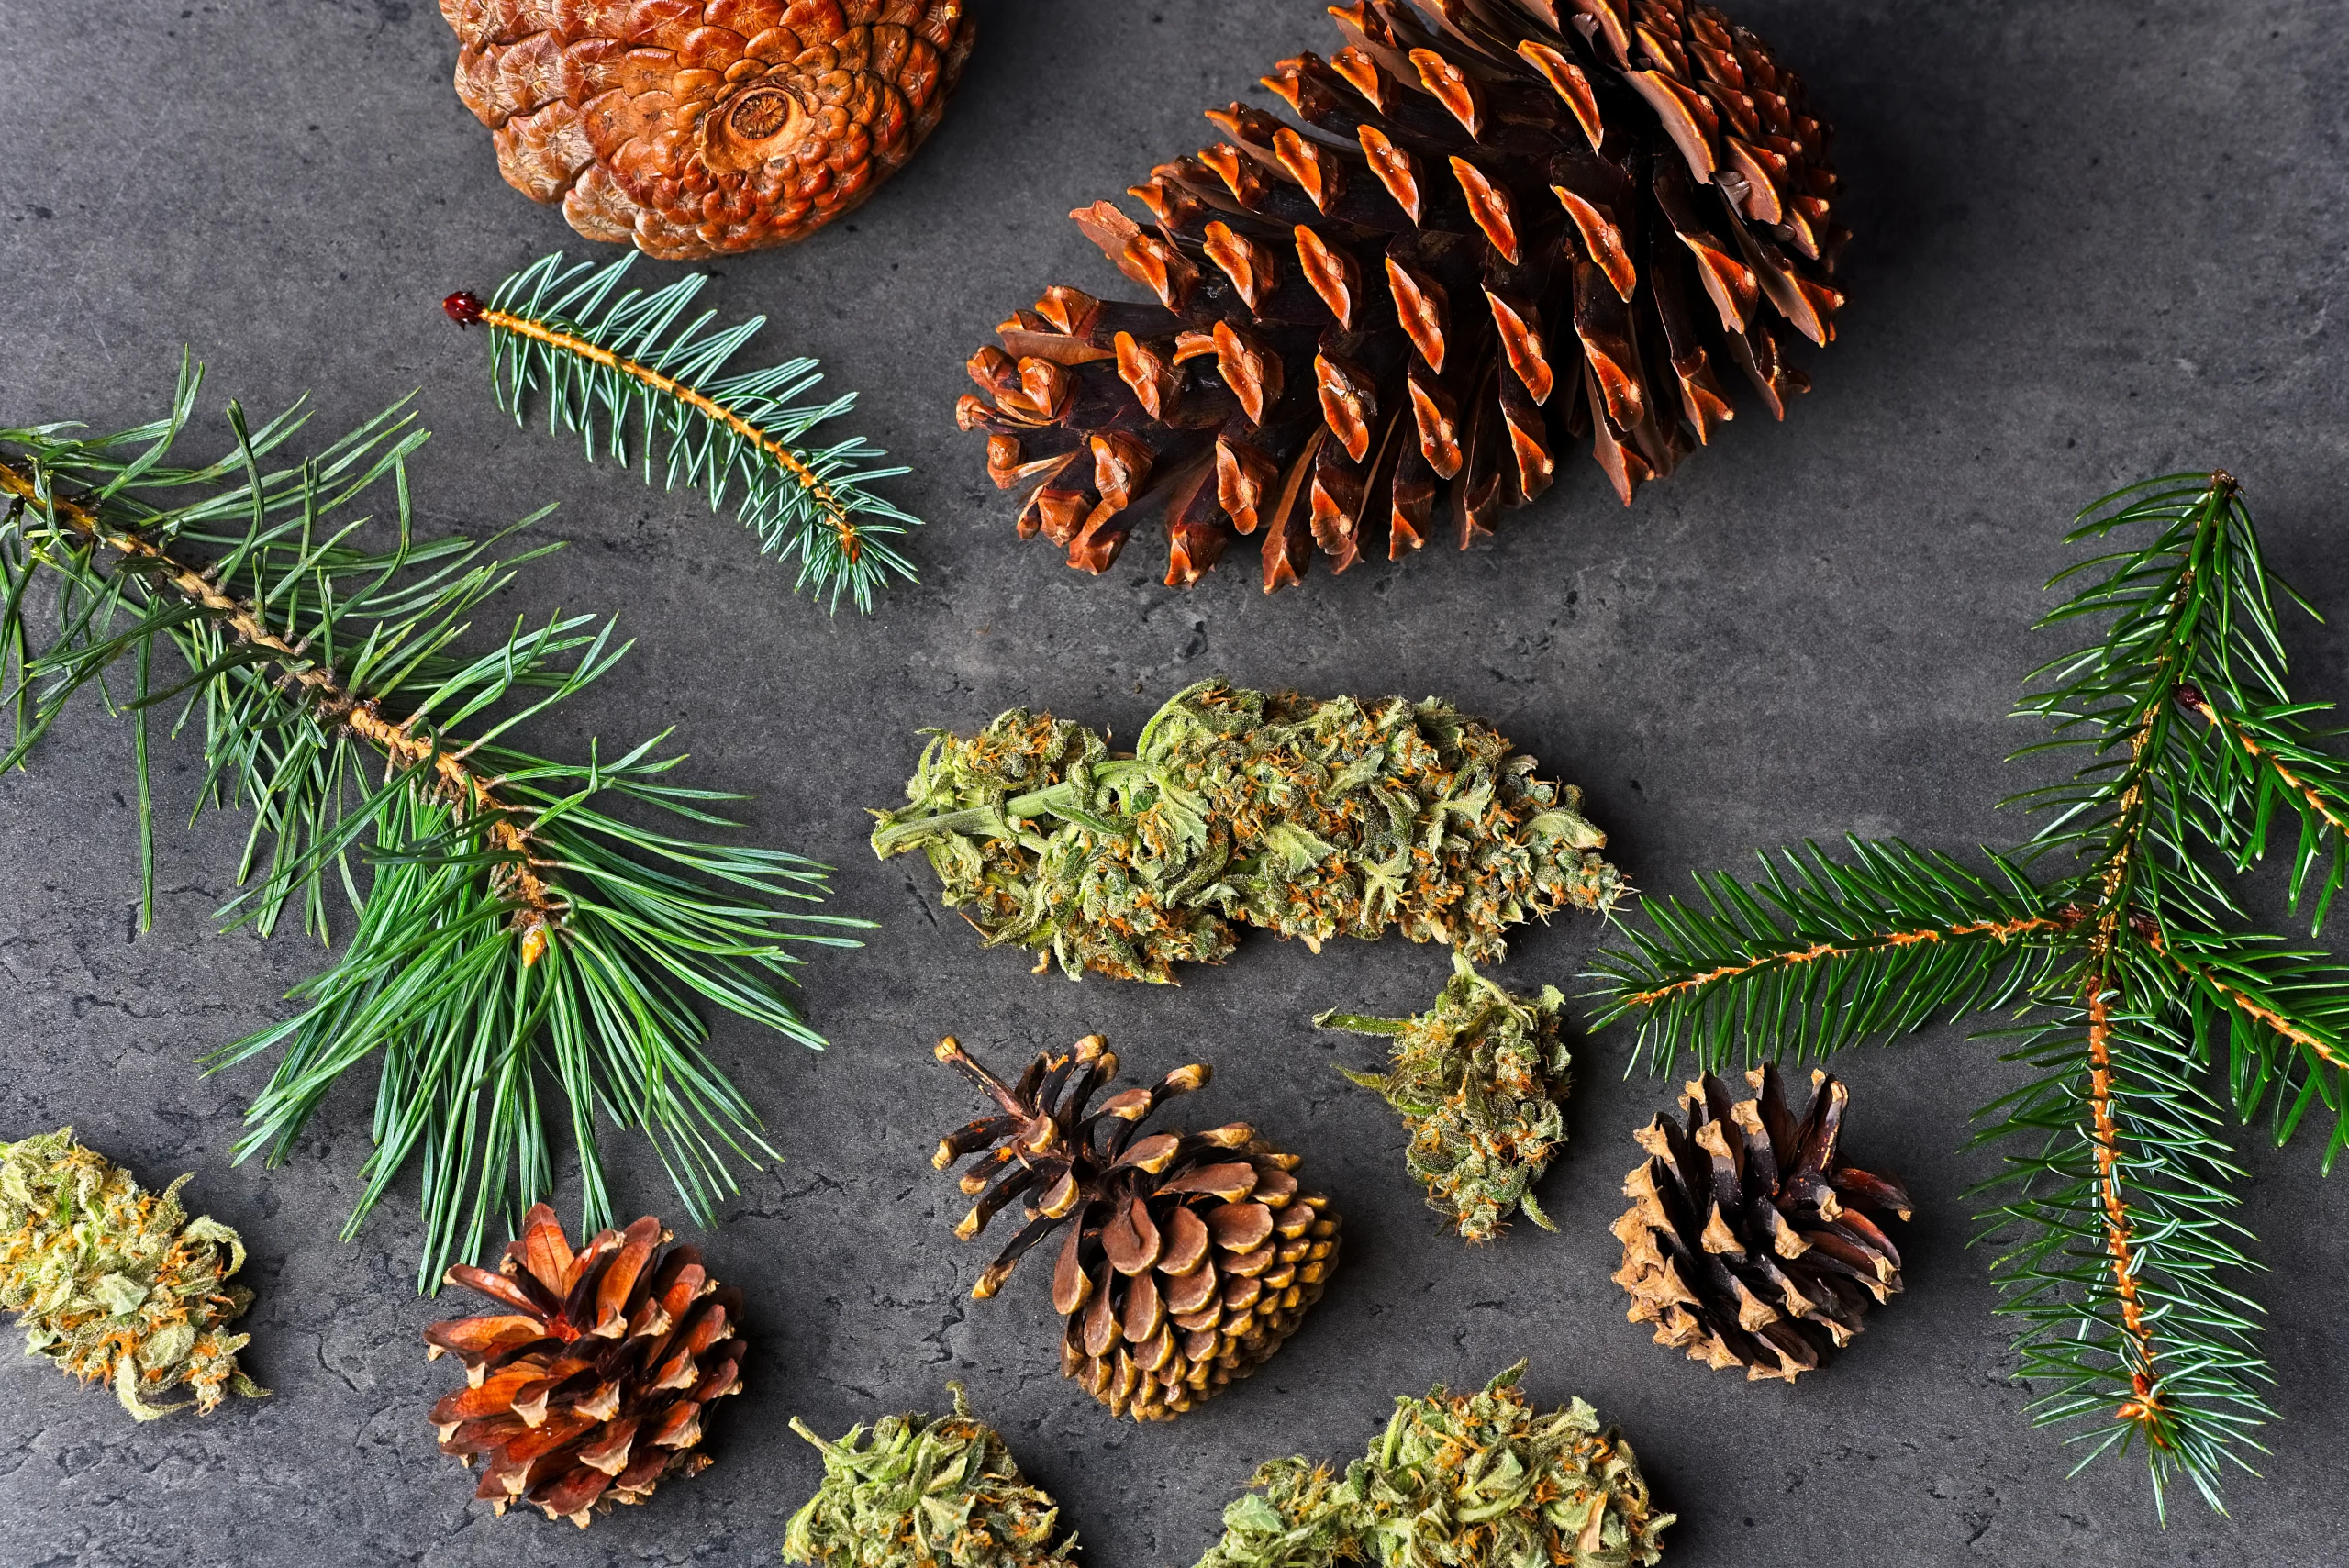 Pinene Terpene: cannabis buds next to pinecones and pine needles on table